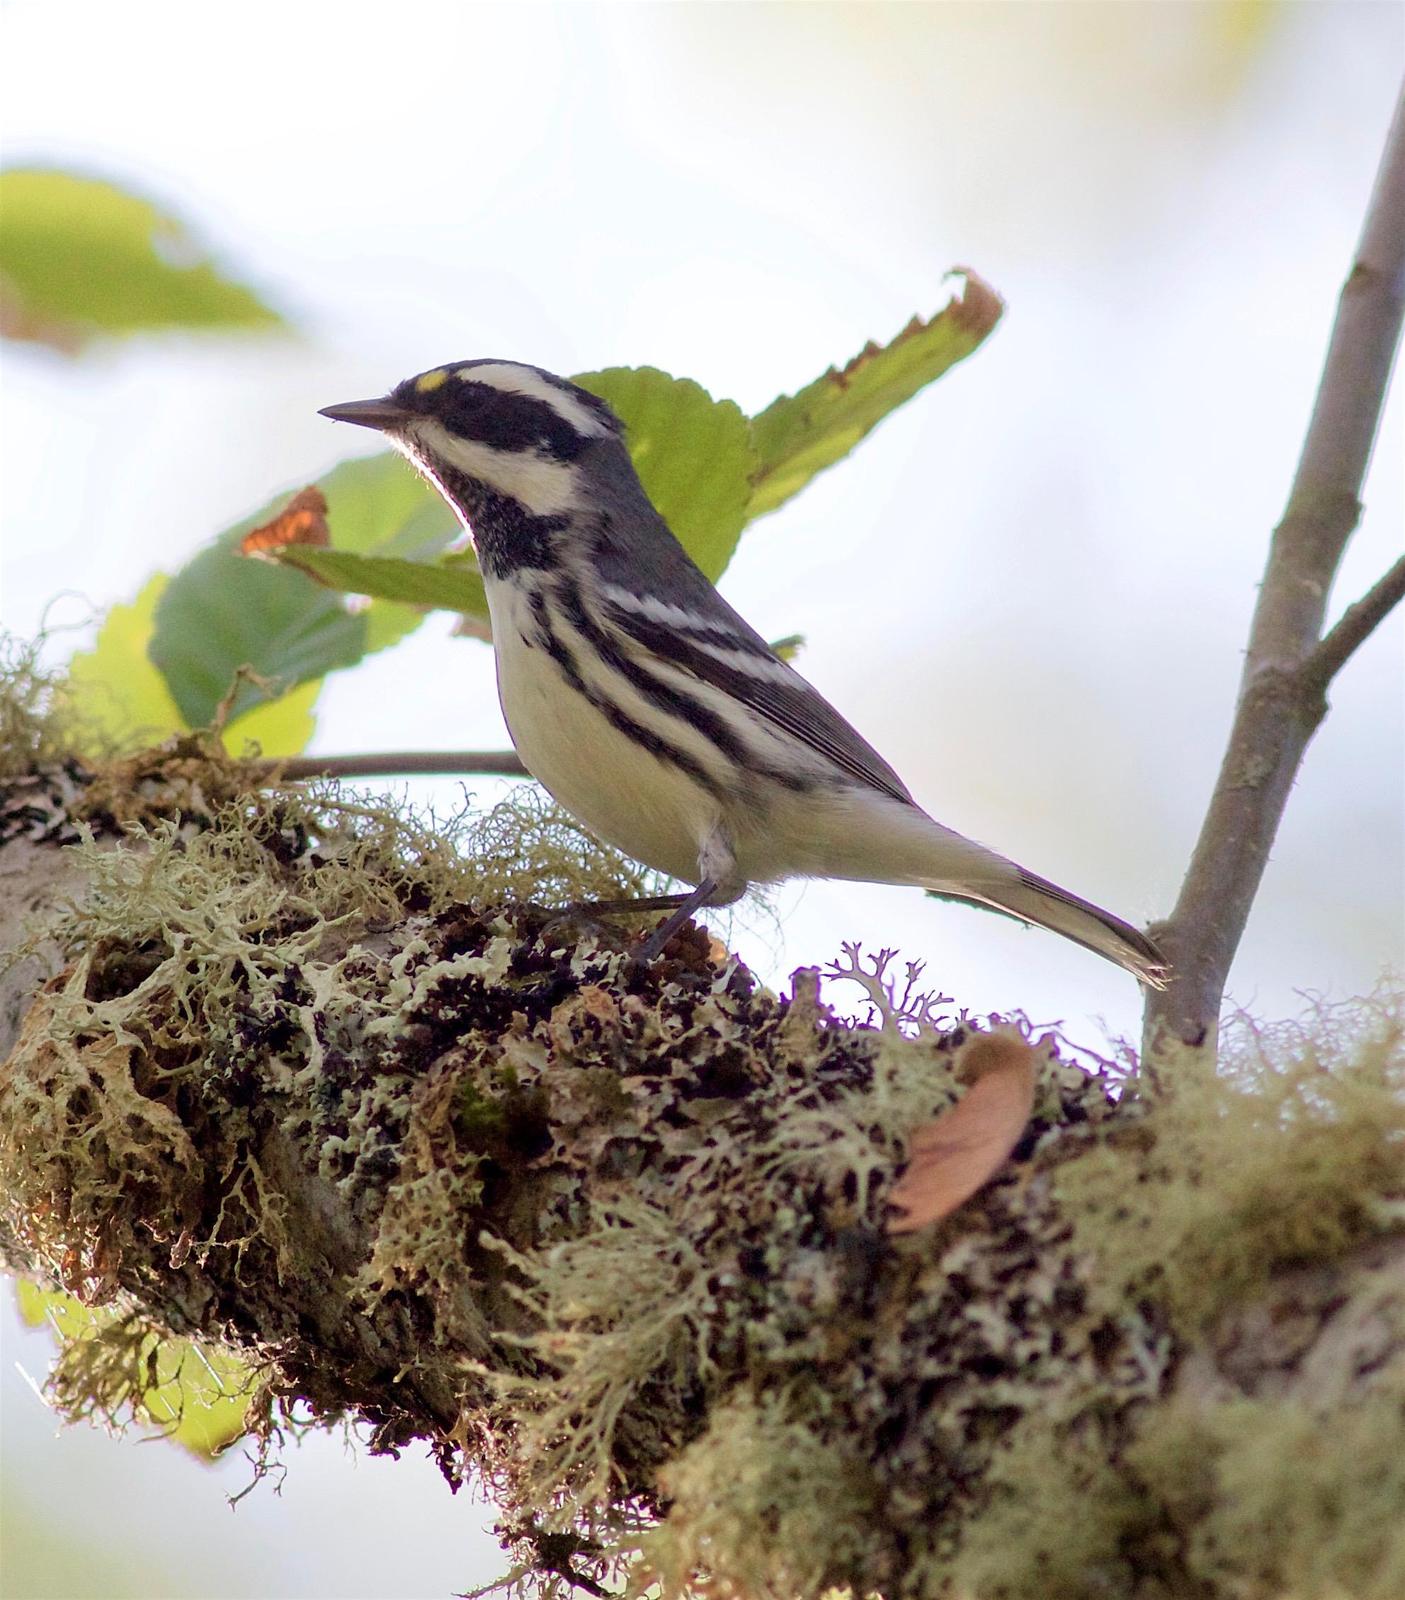 Black-throated Gray Warbler Photo by Kathryn Keith